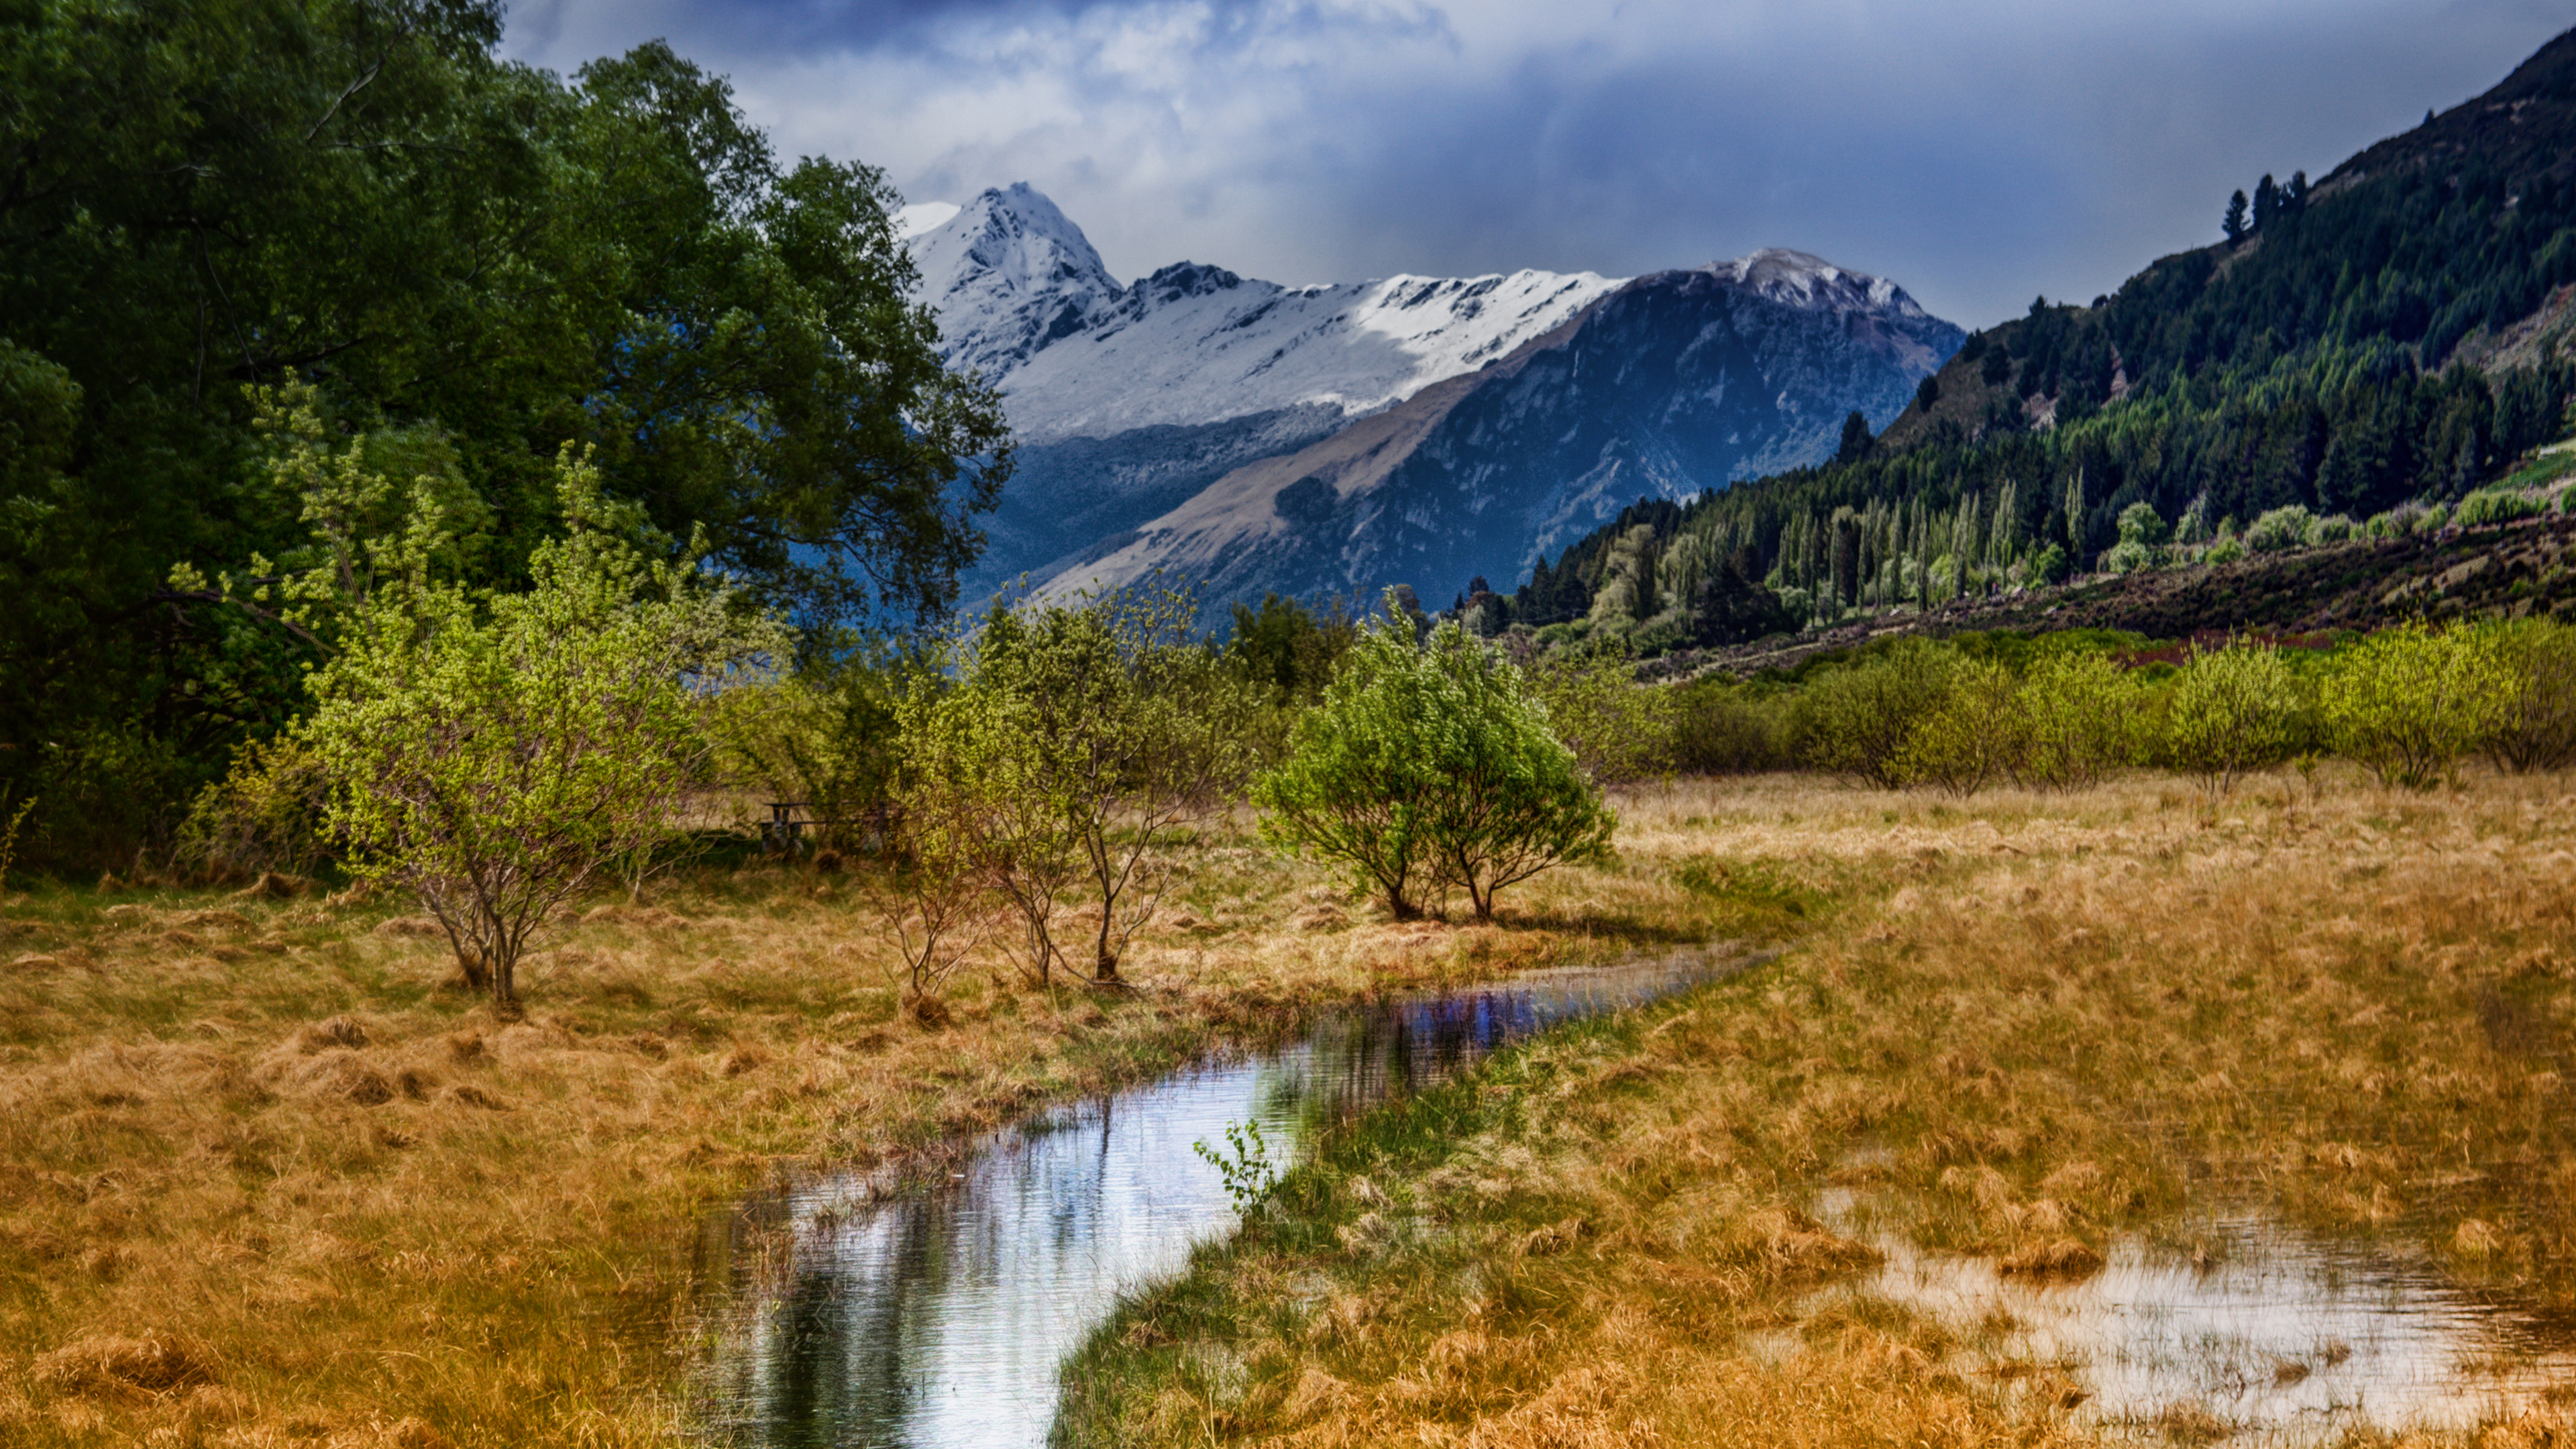 General 3840x2160 landscape 4K New Zealand nature mountains snow water trees